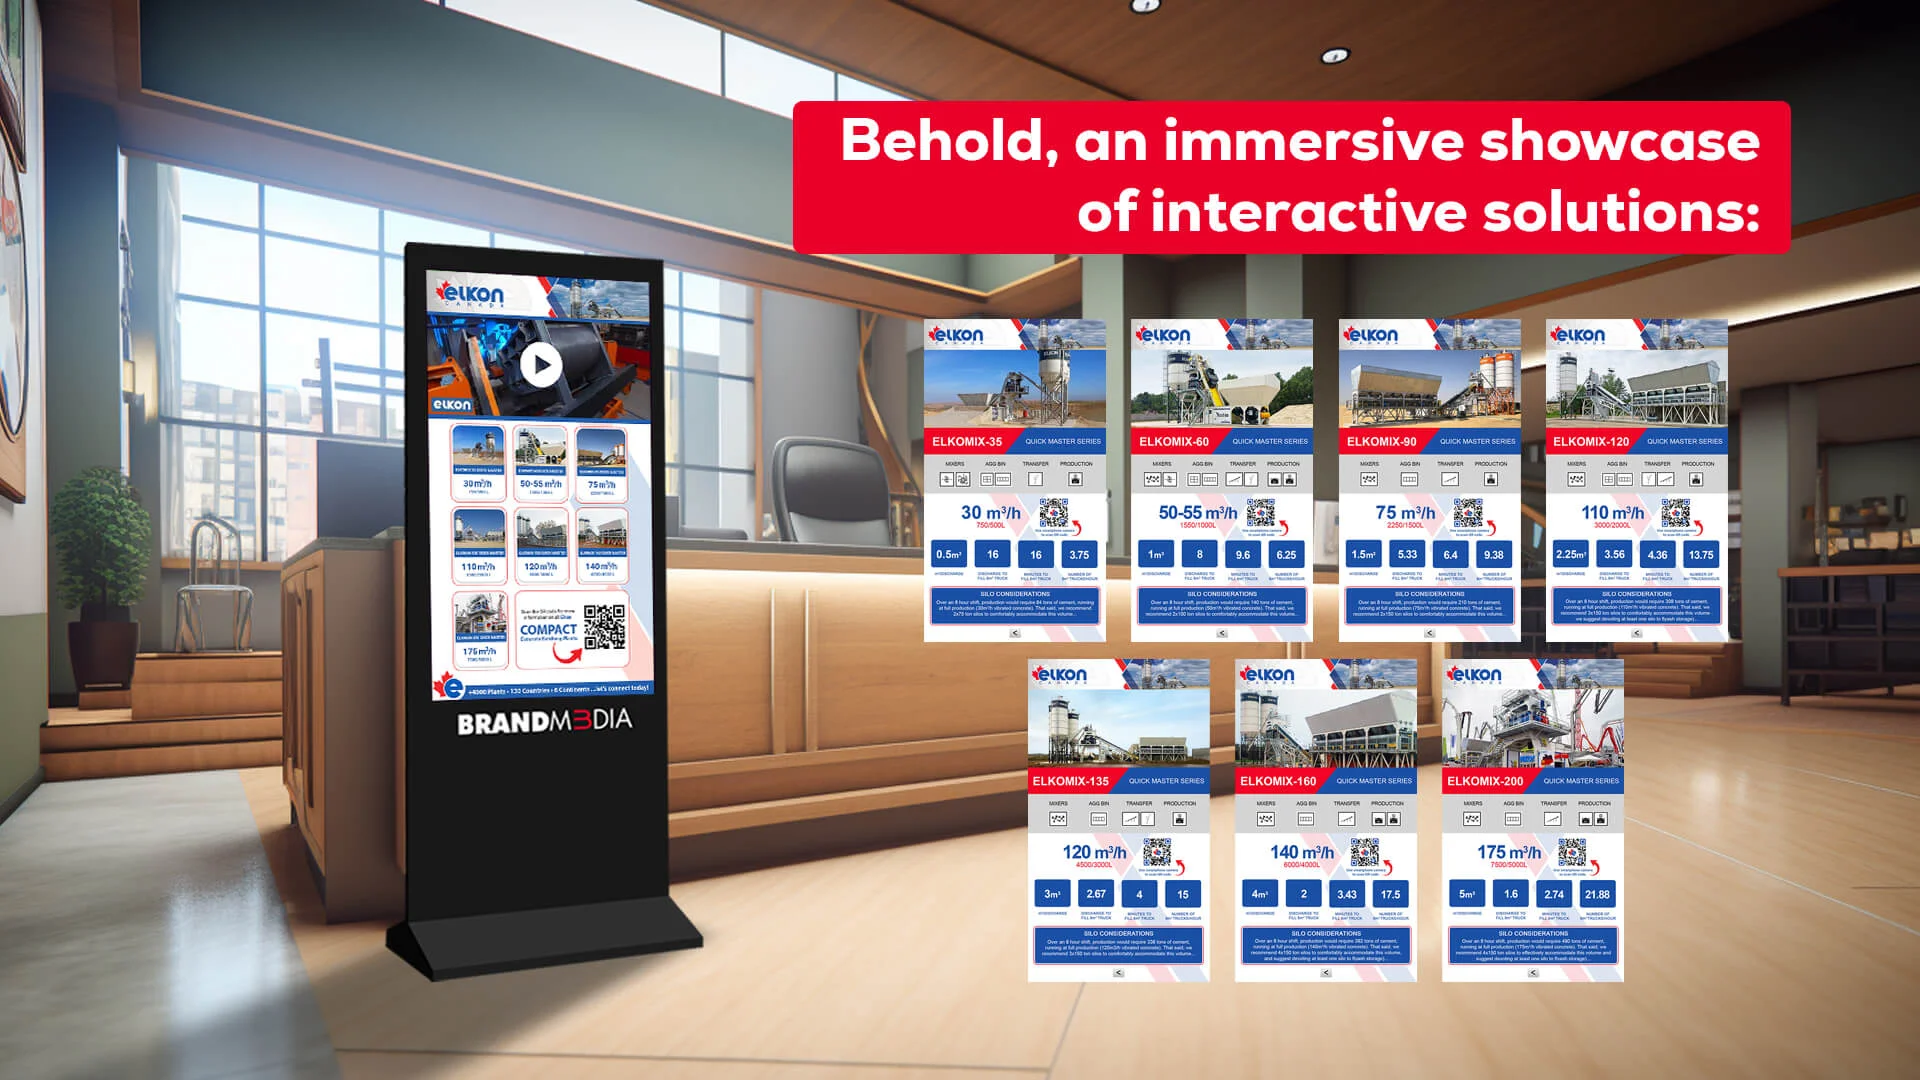 Brandm3dia- behold an immersive showcase of interactive solutions